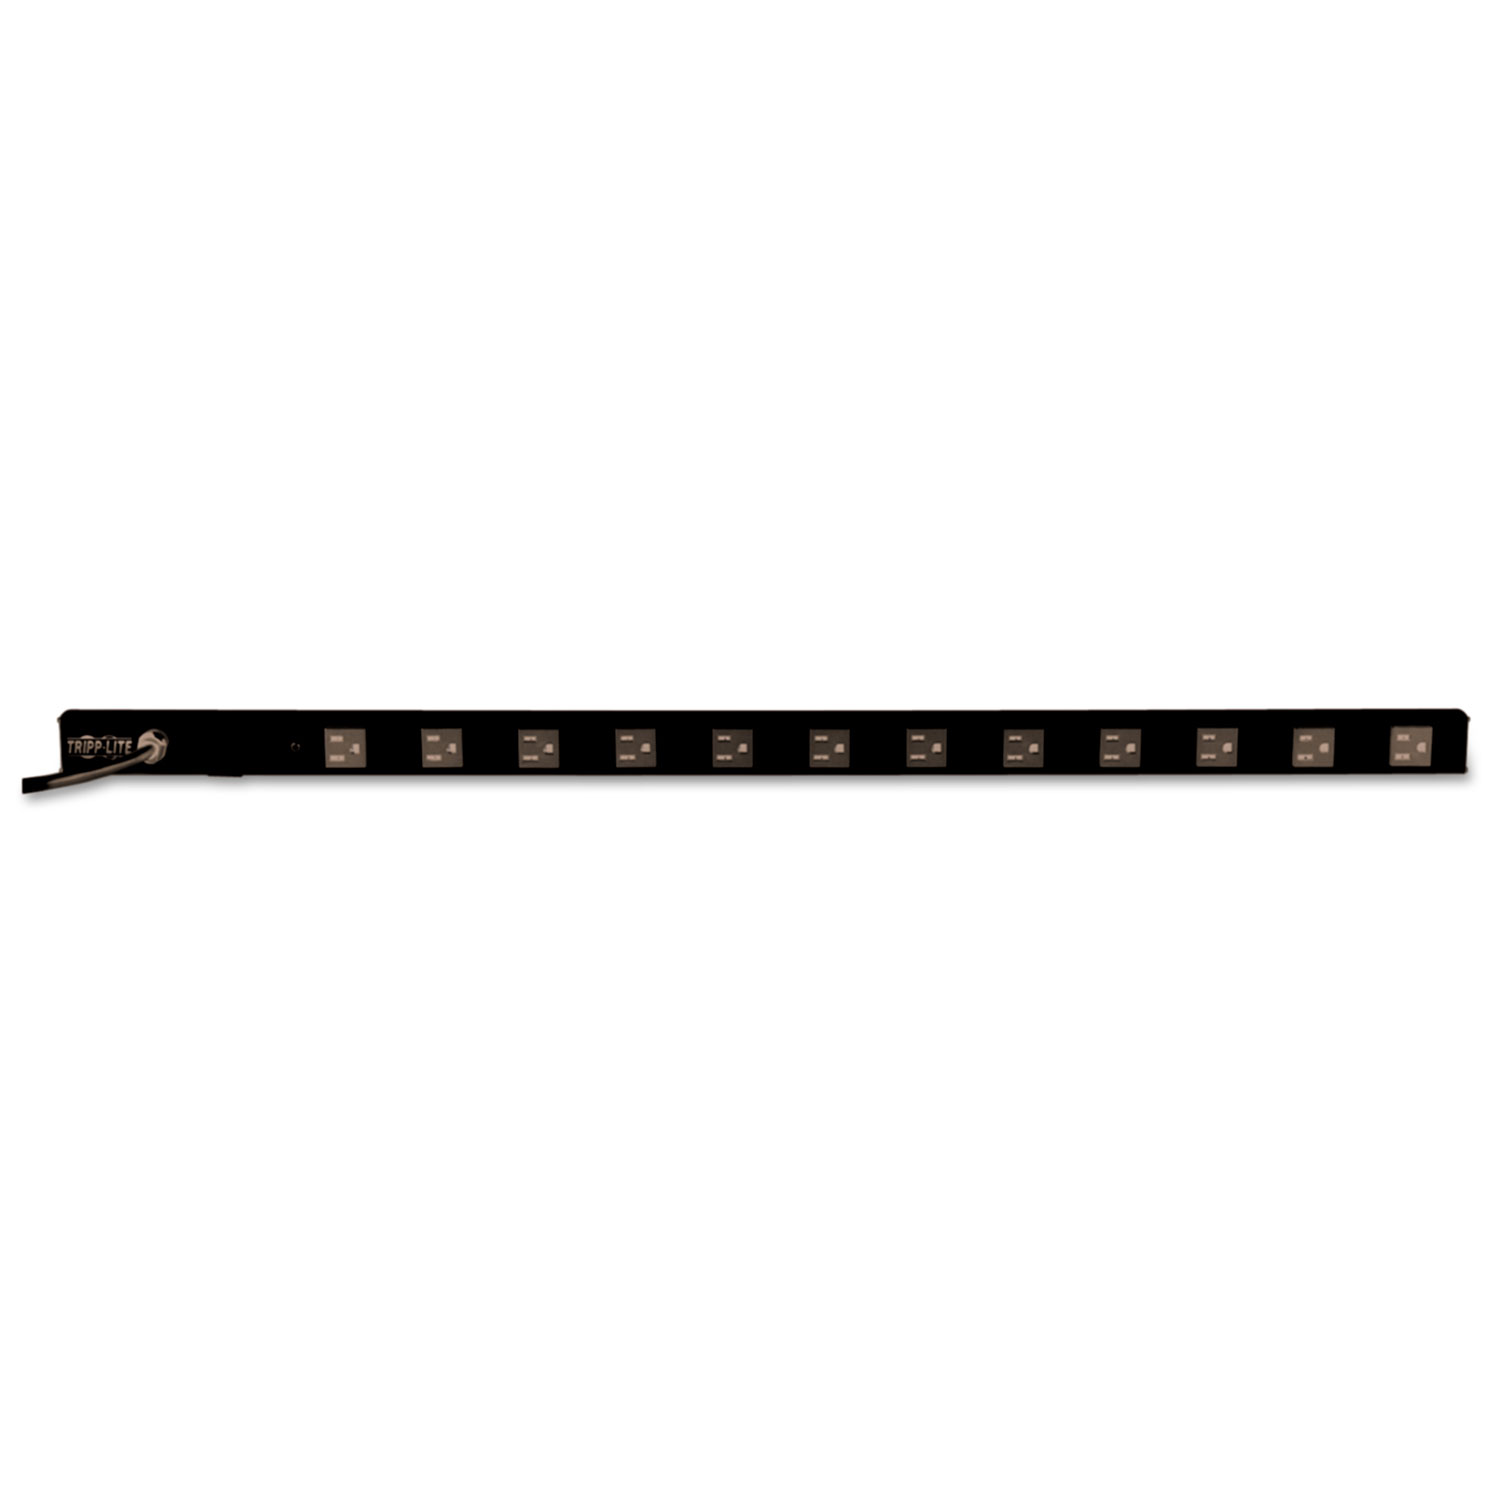 Vertical Power Strip, 12 Outlets, 6 ft. Cord, 36